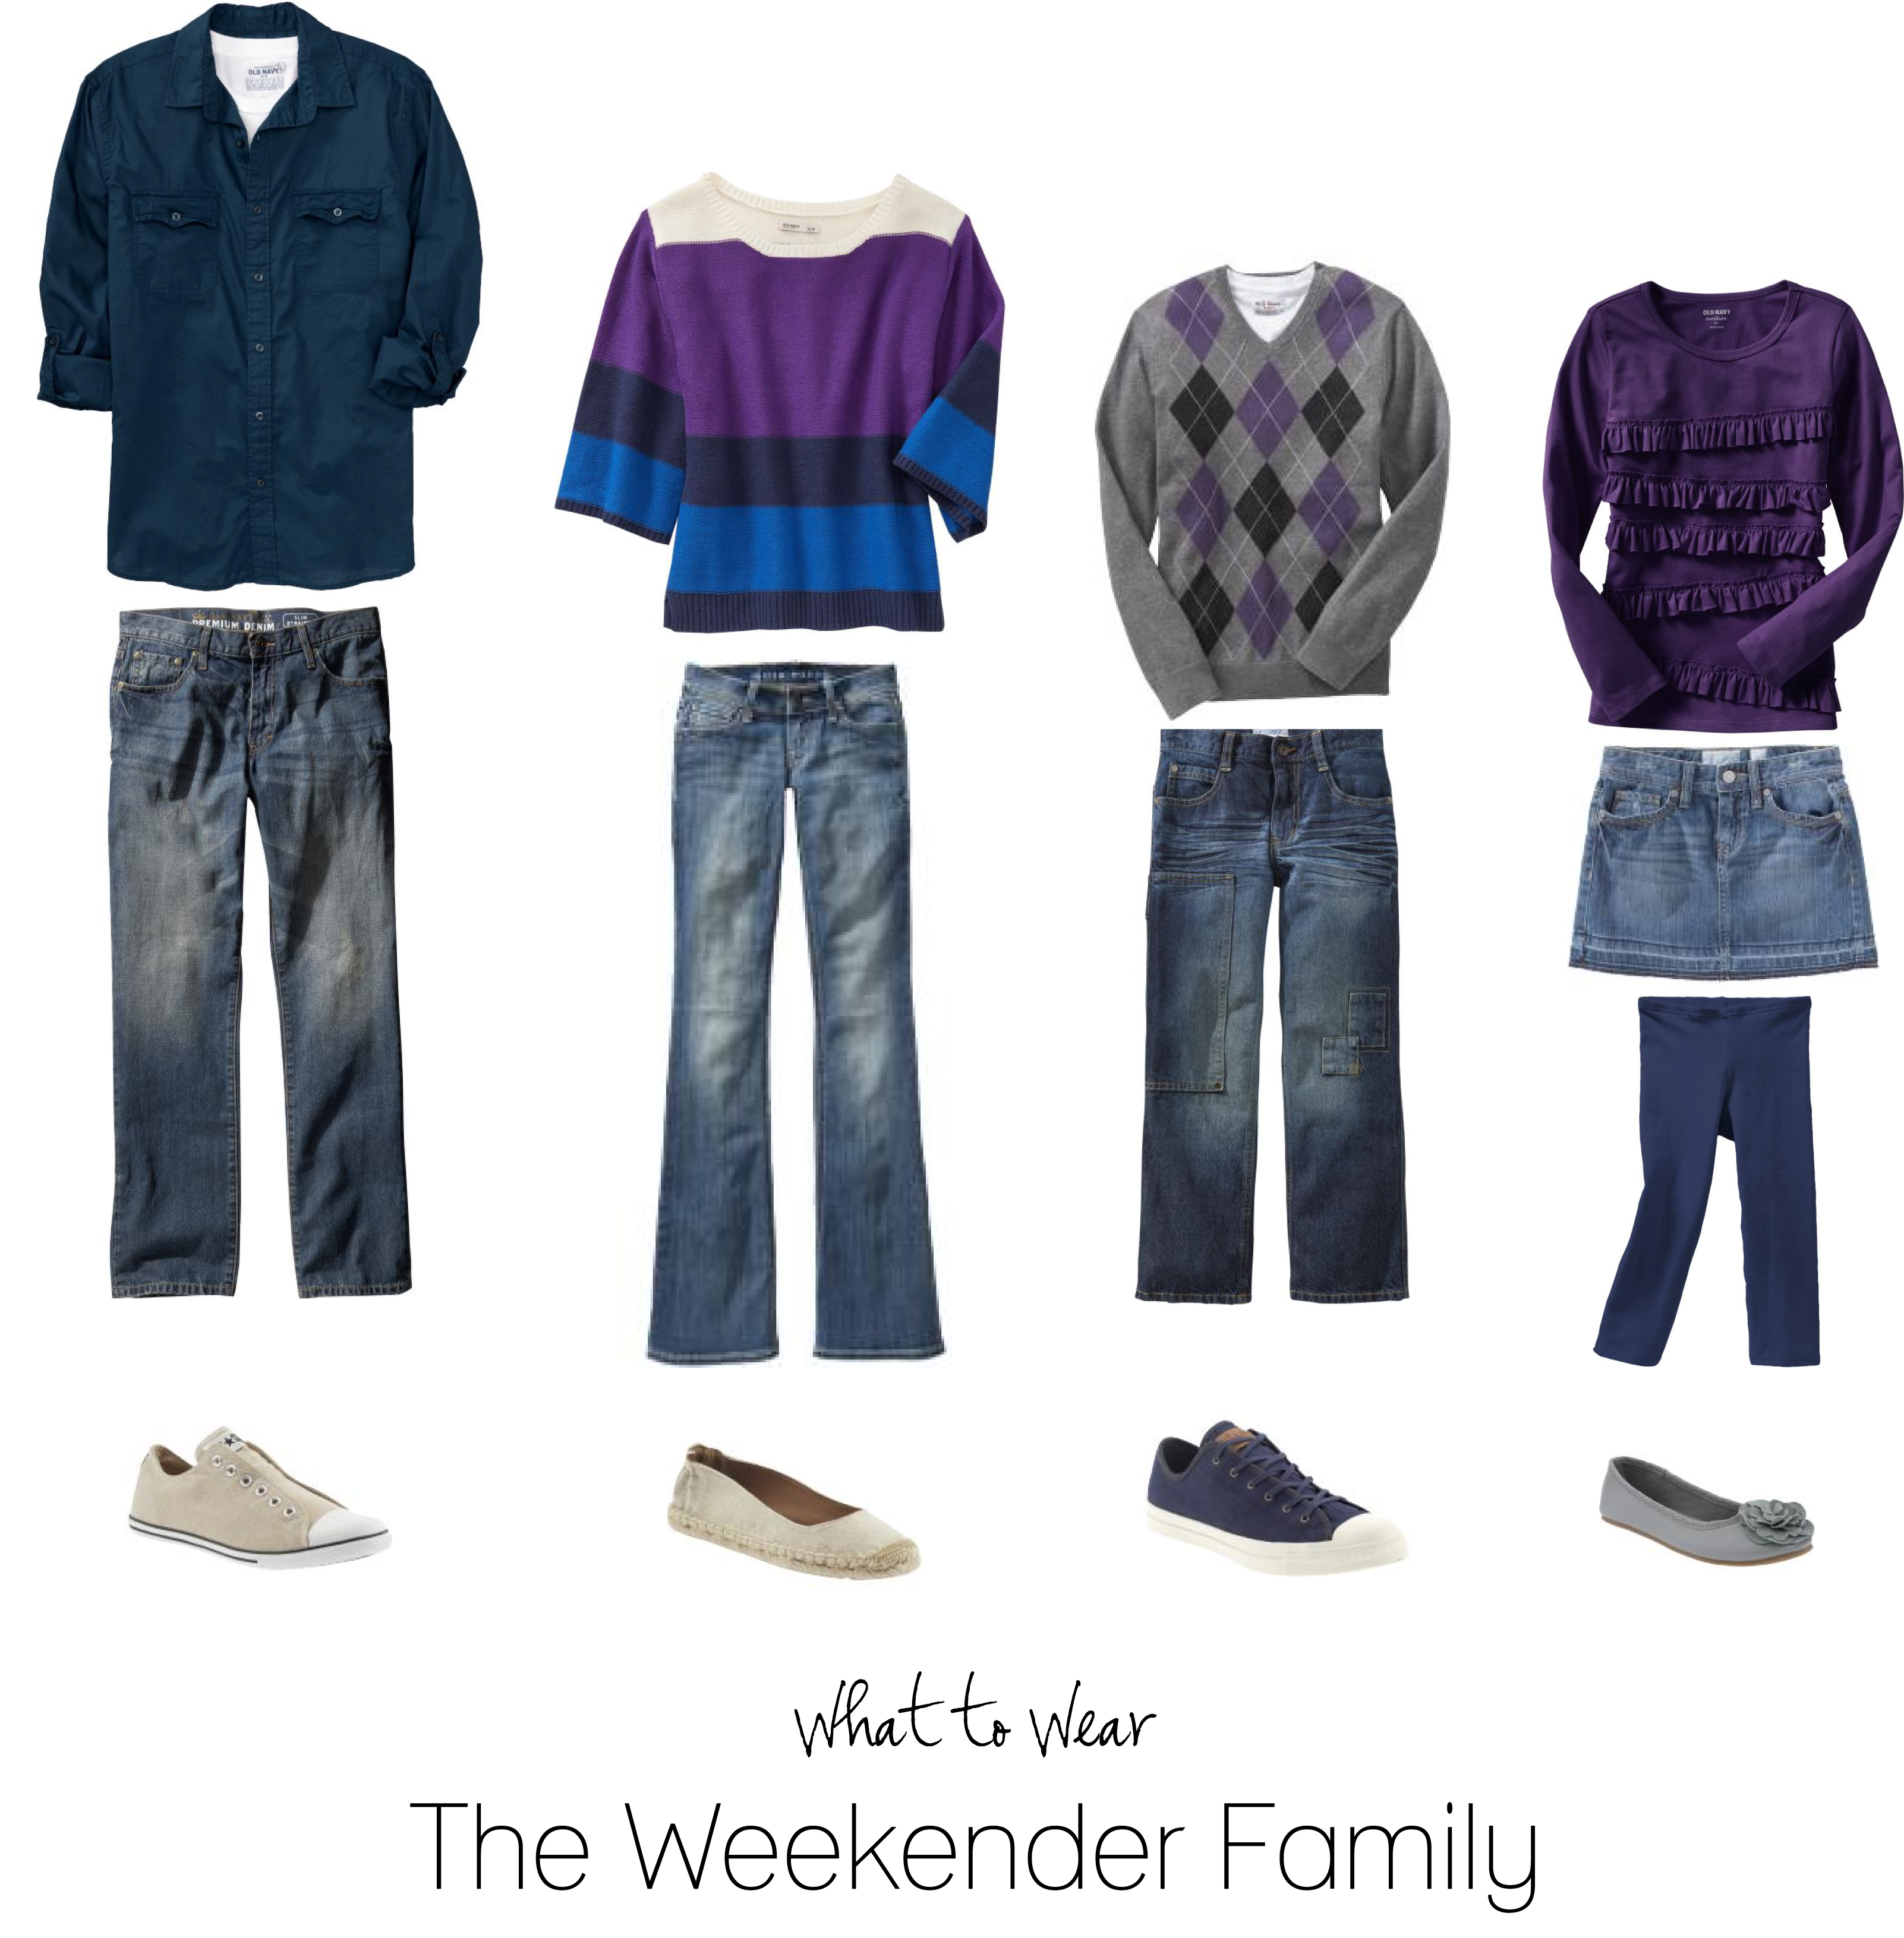 What to wear for the laid back family